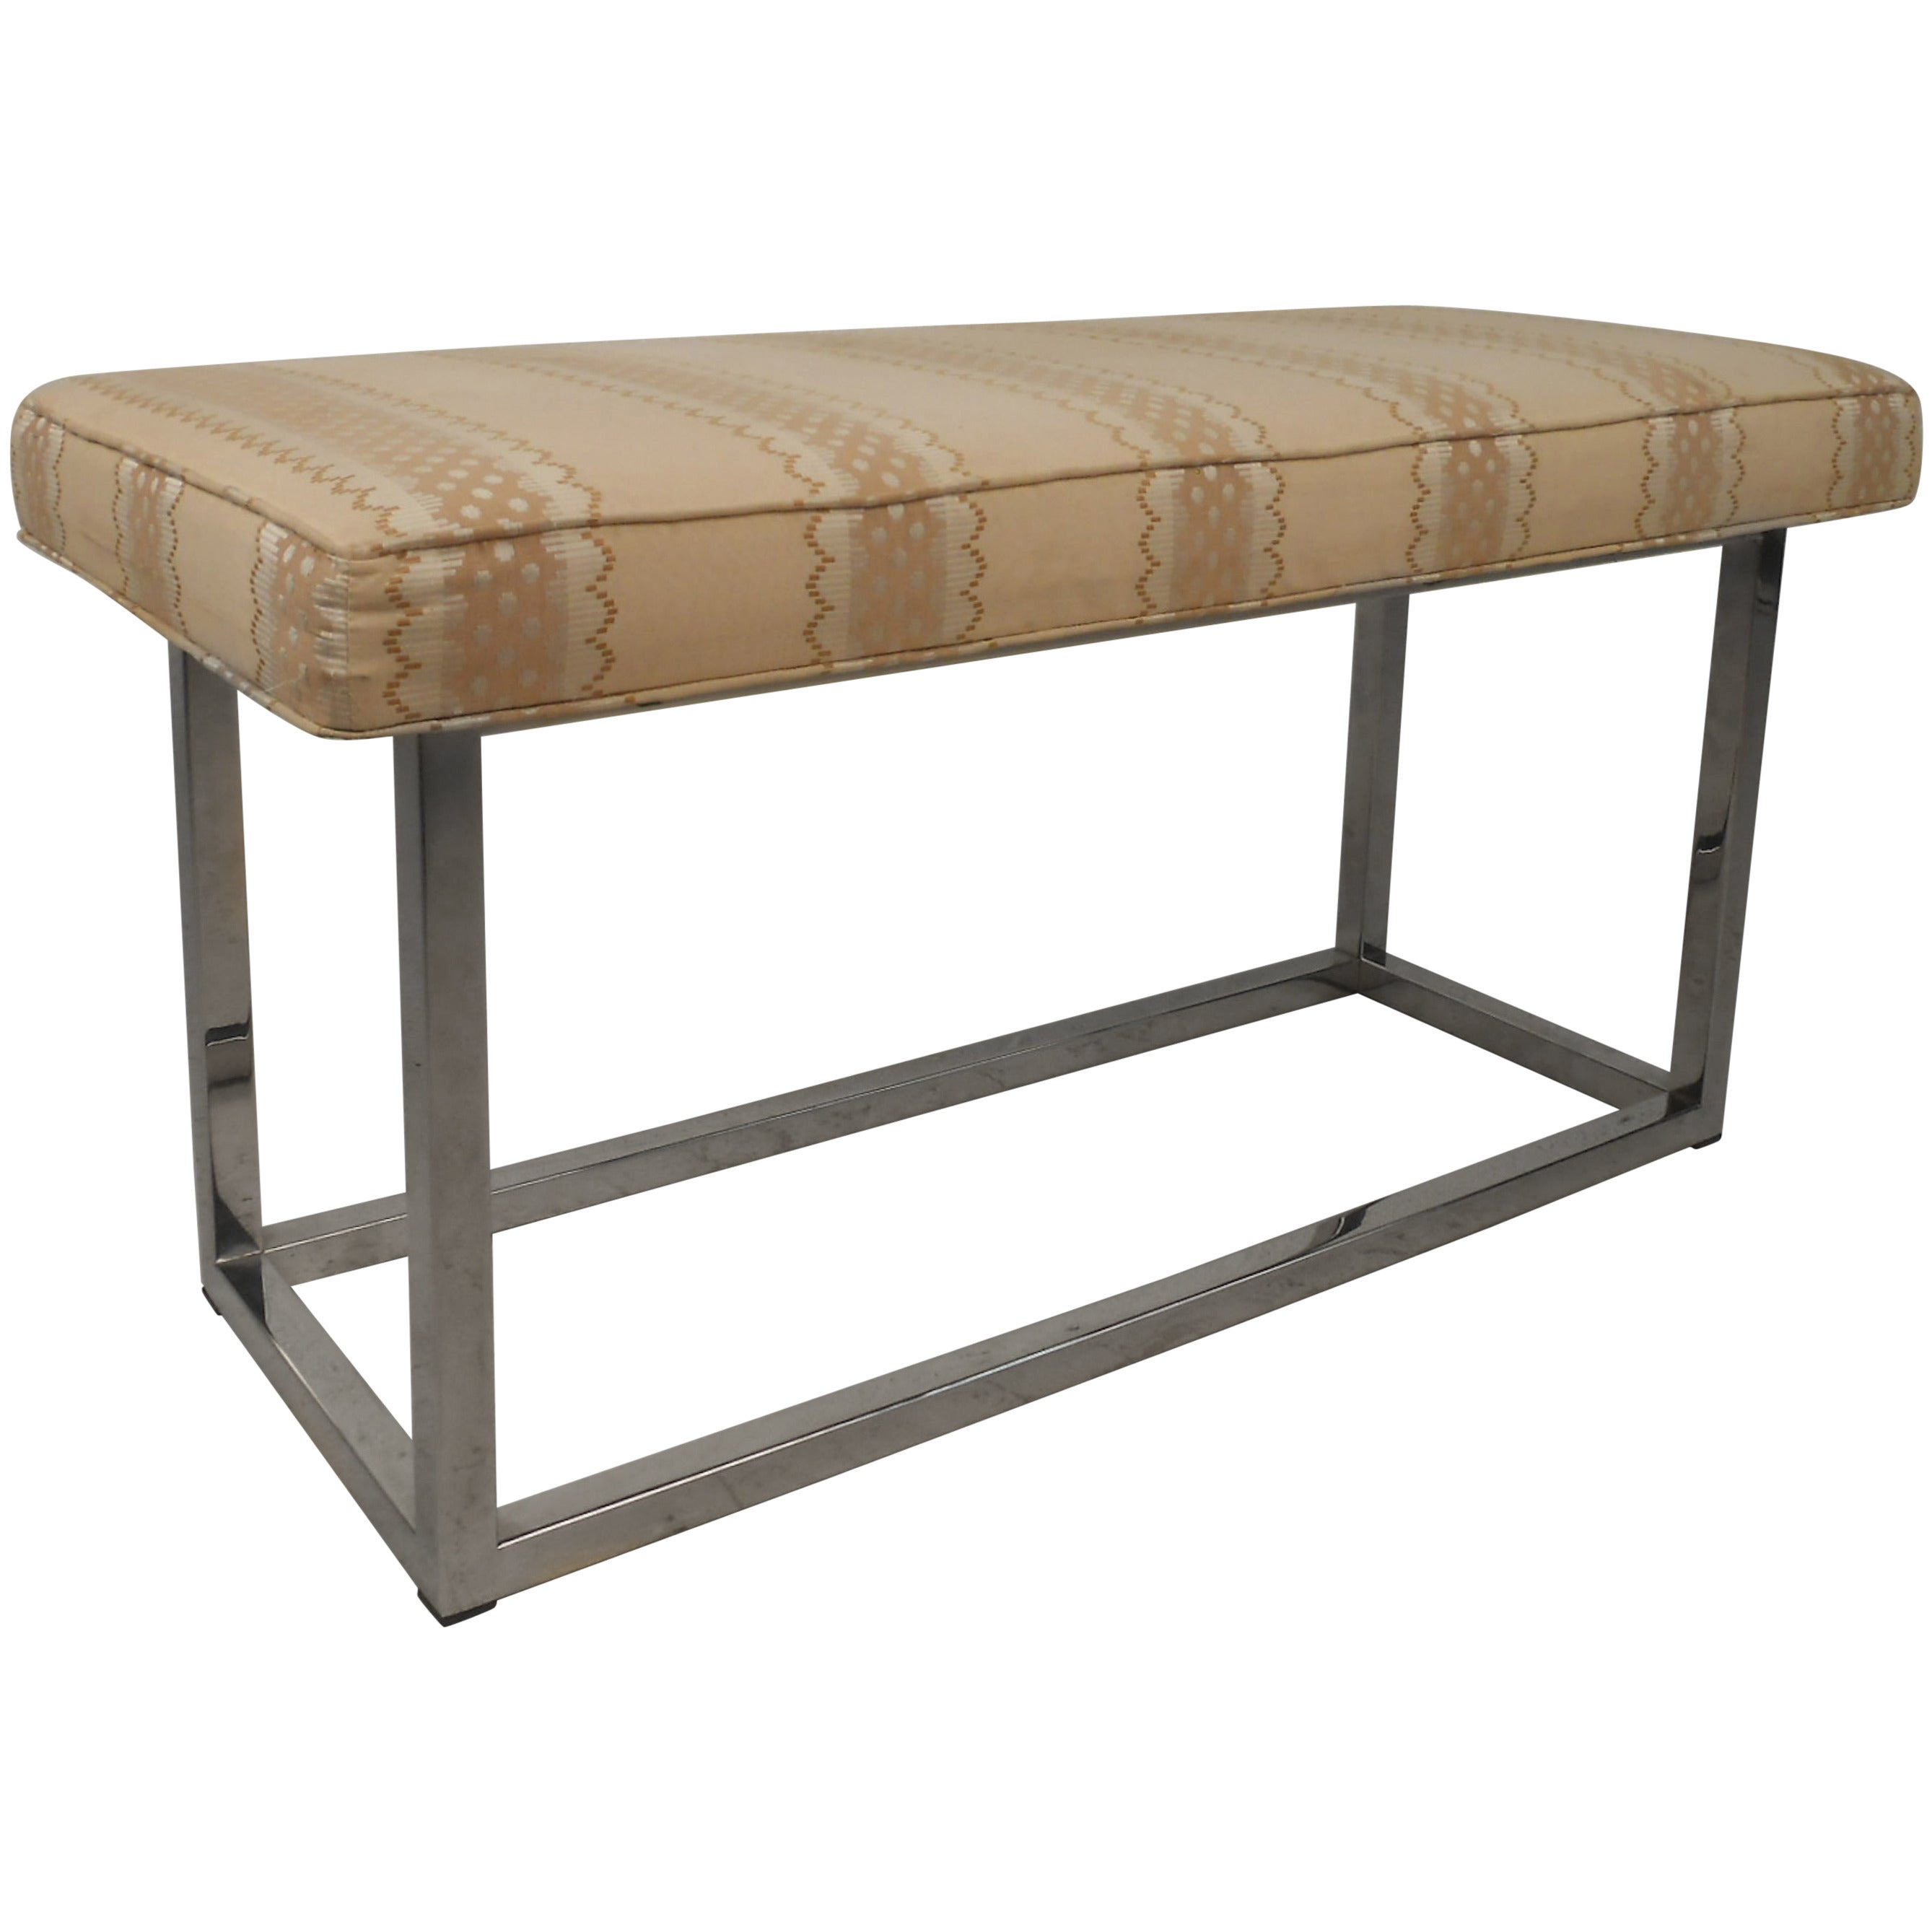 Mid-Century Modern Upholstered Bench with Solid Chrome Frame